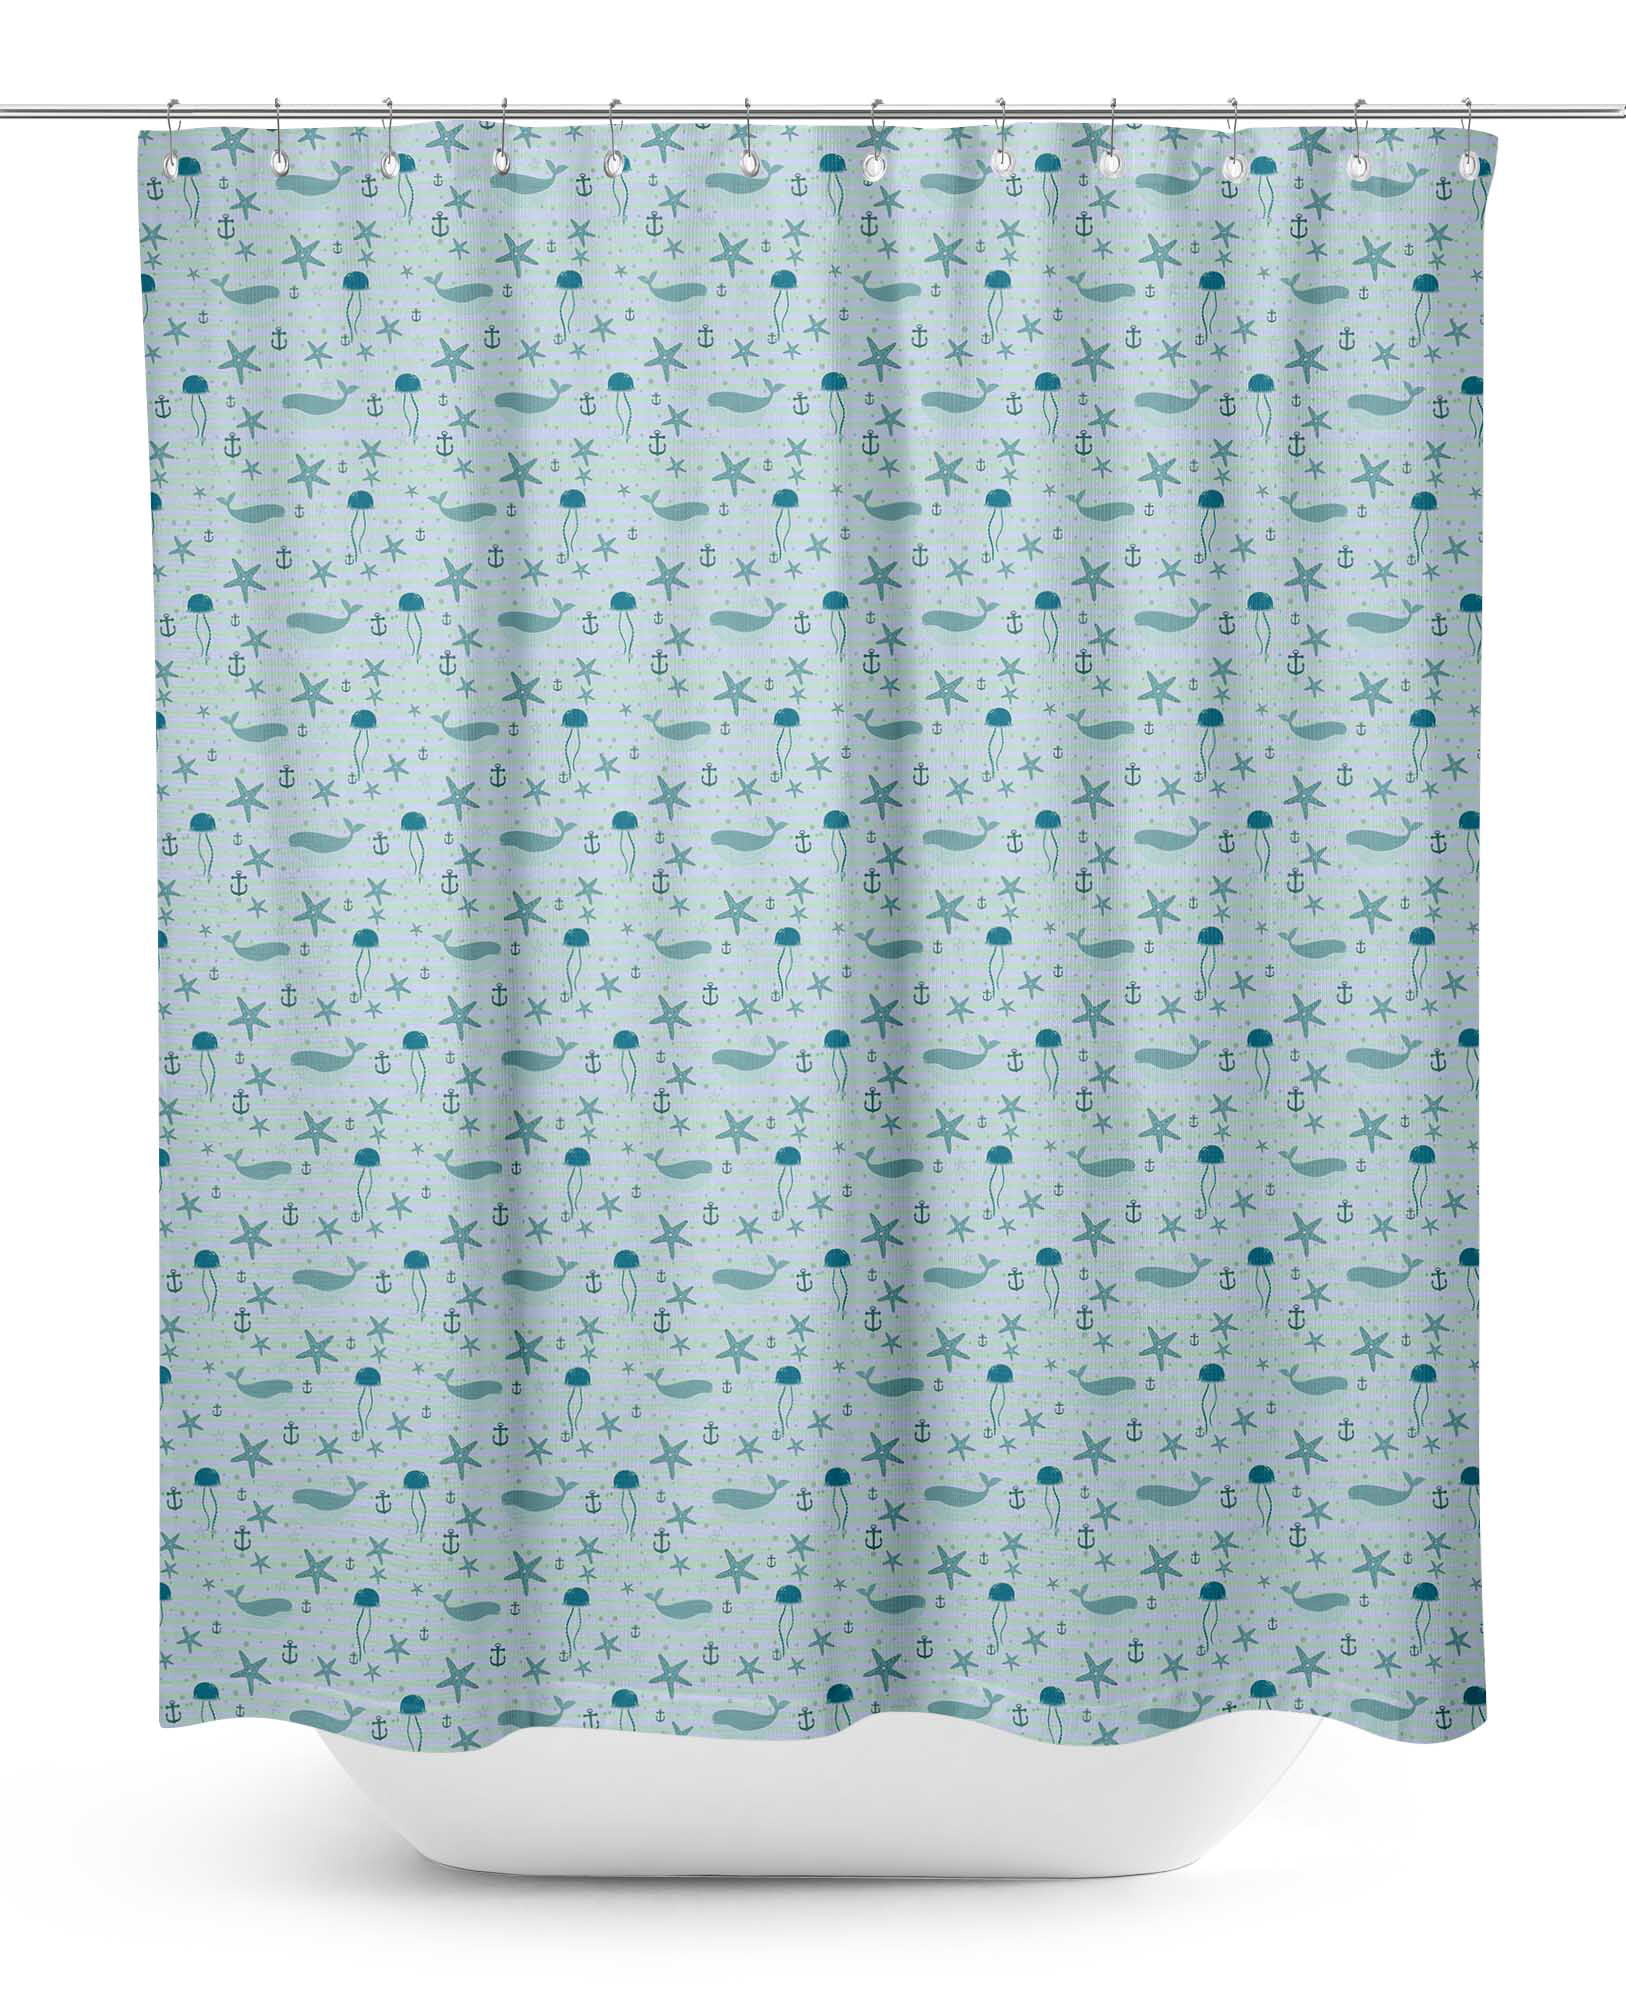 Blue Whale Waterproof Bathroom Polyester Shower Curtain Liner Water Resistant 